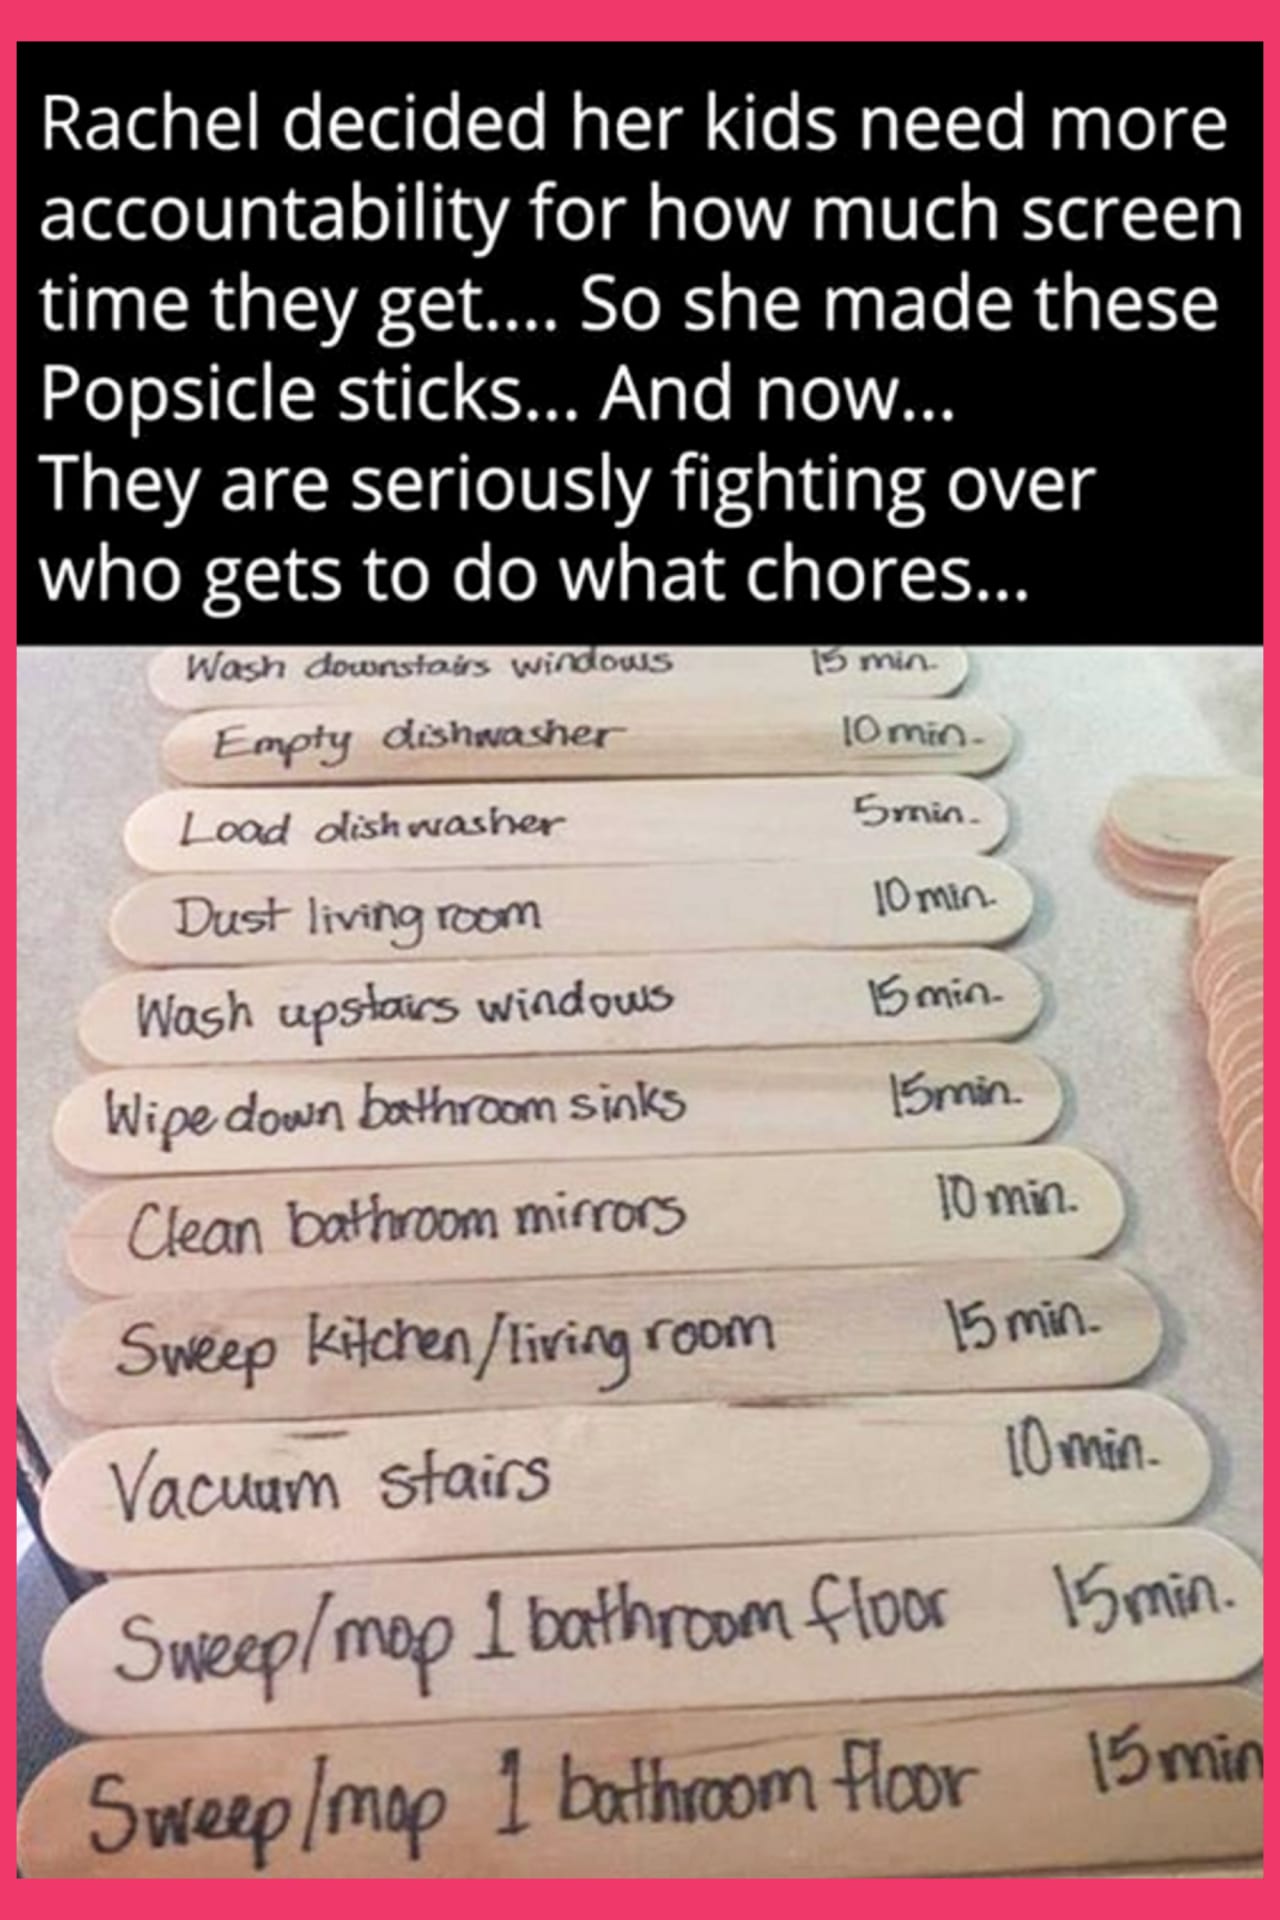 GENIUS Chore Chart Idea for Kids! Pay kids for doing chores with screen time.  Many parents have electronics use rules in their house, so why not get your kids to help around the house, do chores and/or clean in exchange for that time on their tablet, phone, or gaming system?  Brilliant!